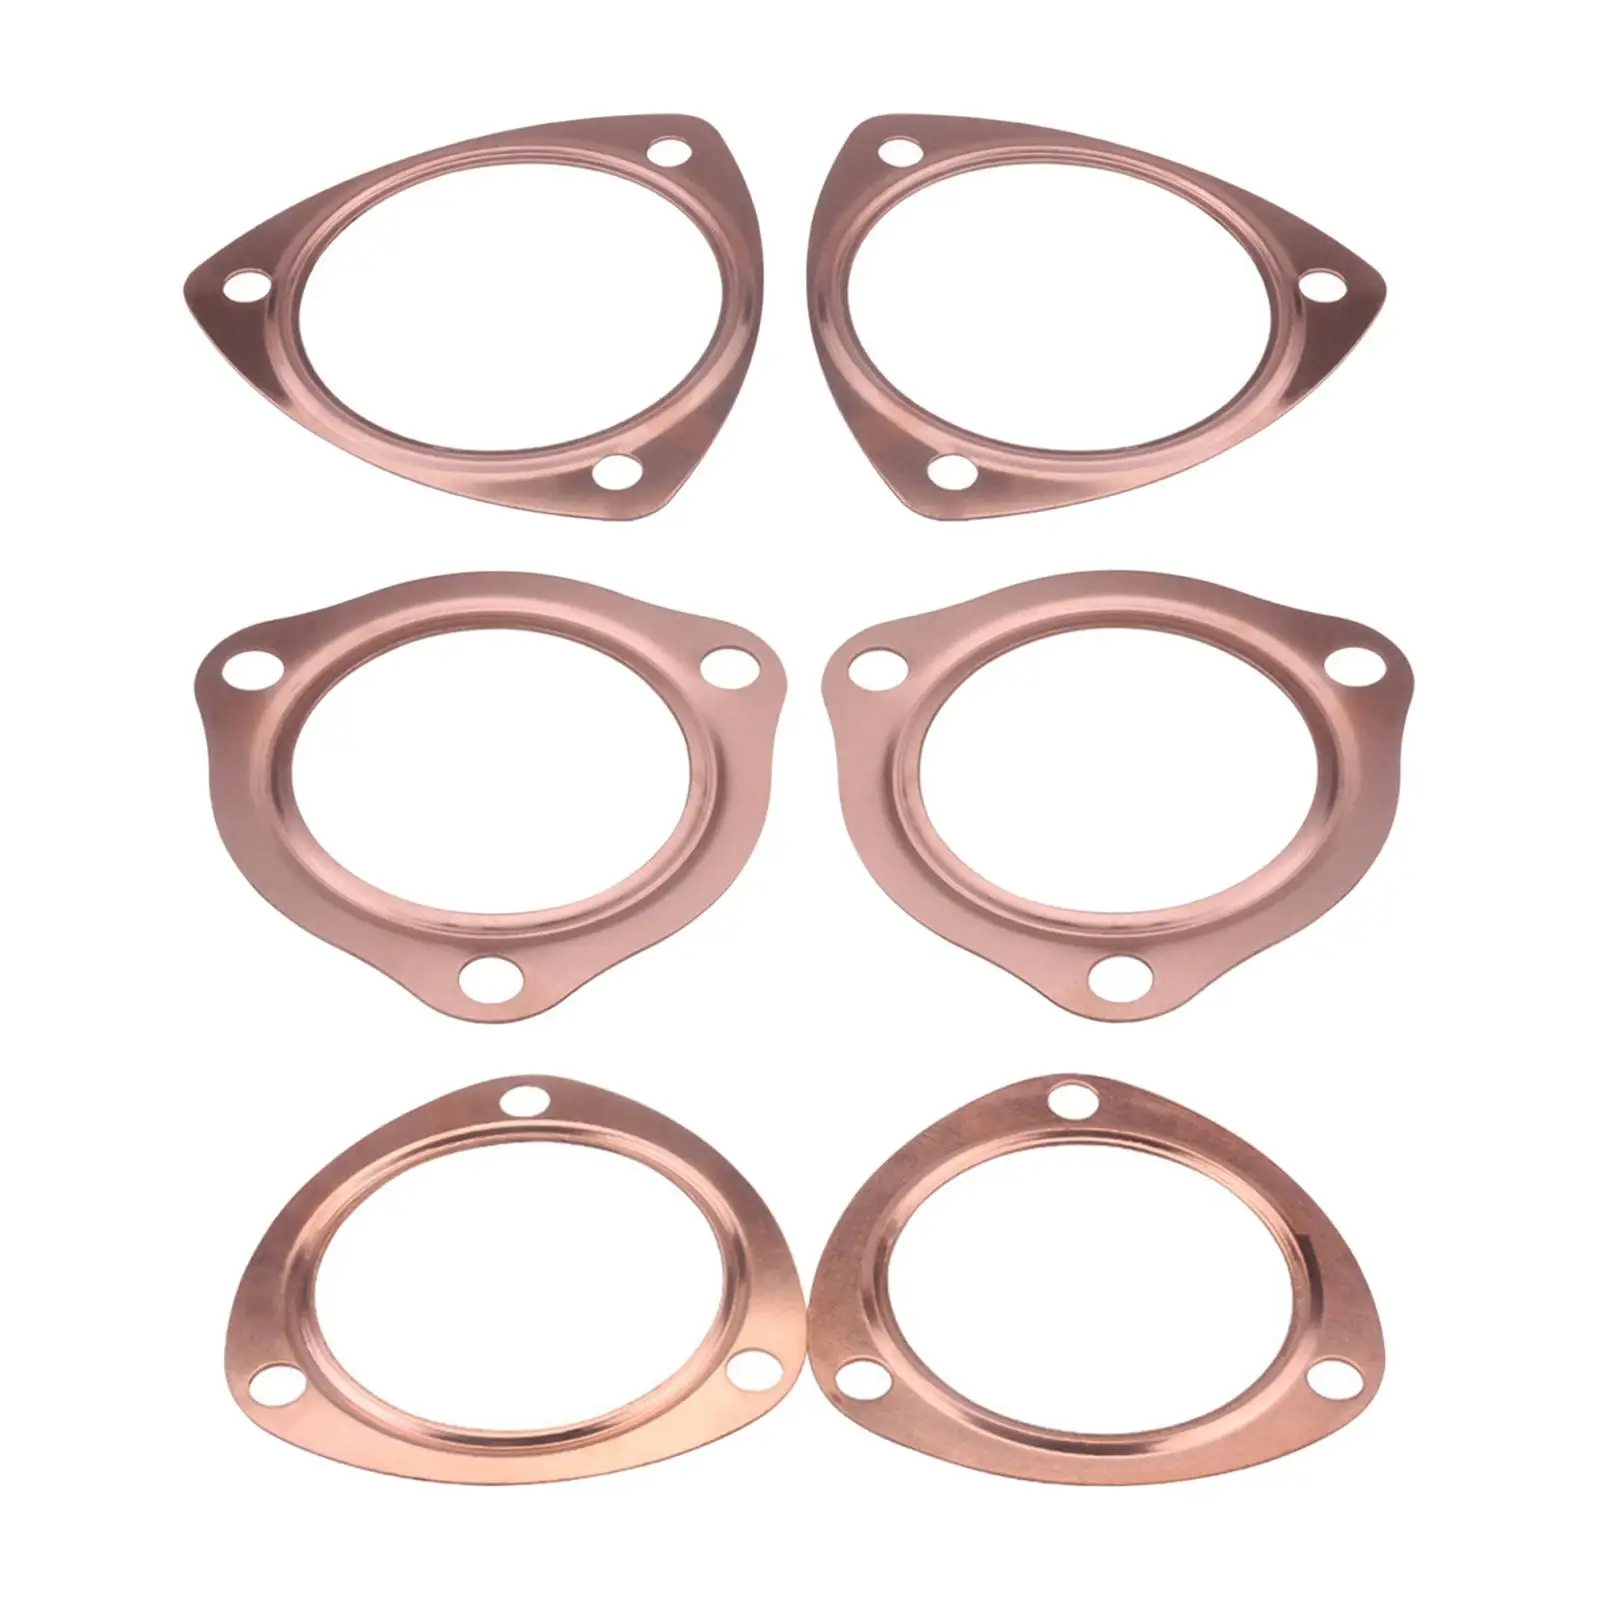 Copper Collector Gasket for Sbc 302 350 454 Automotive Replacement